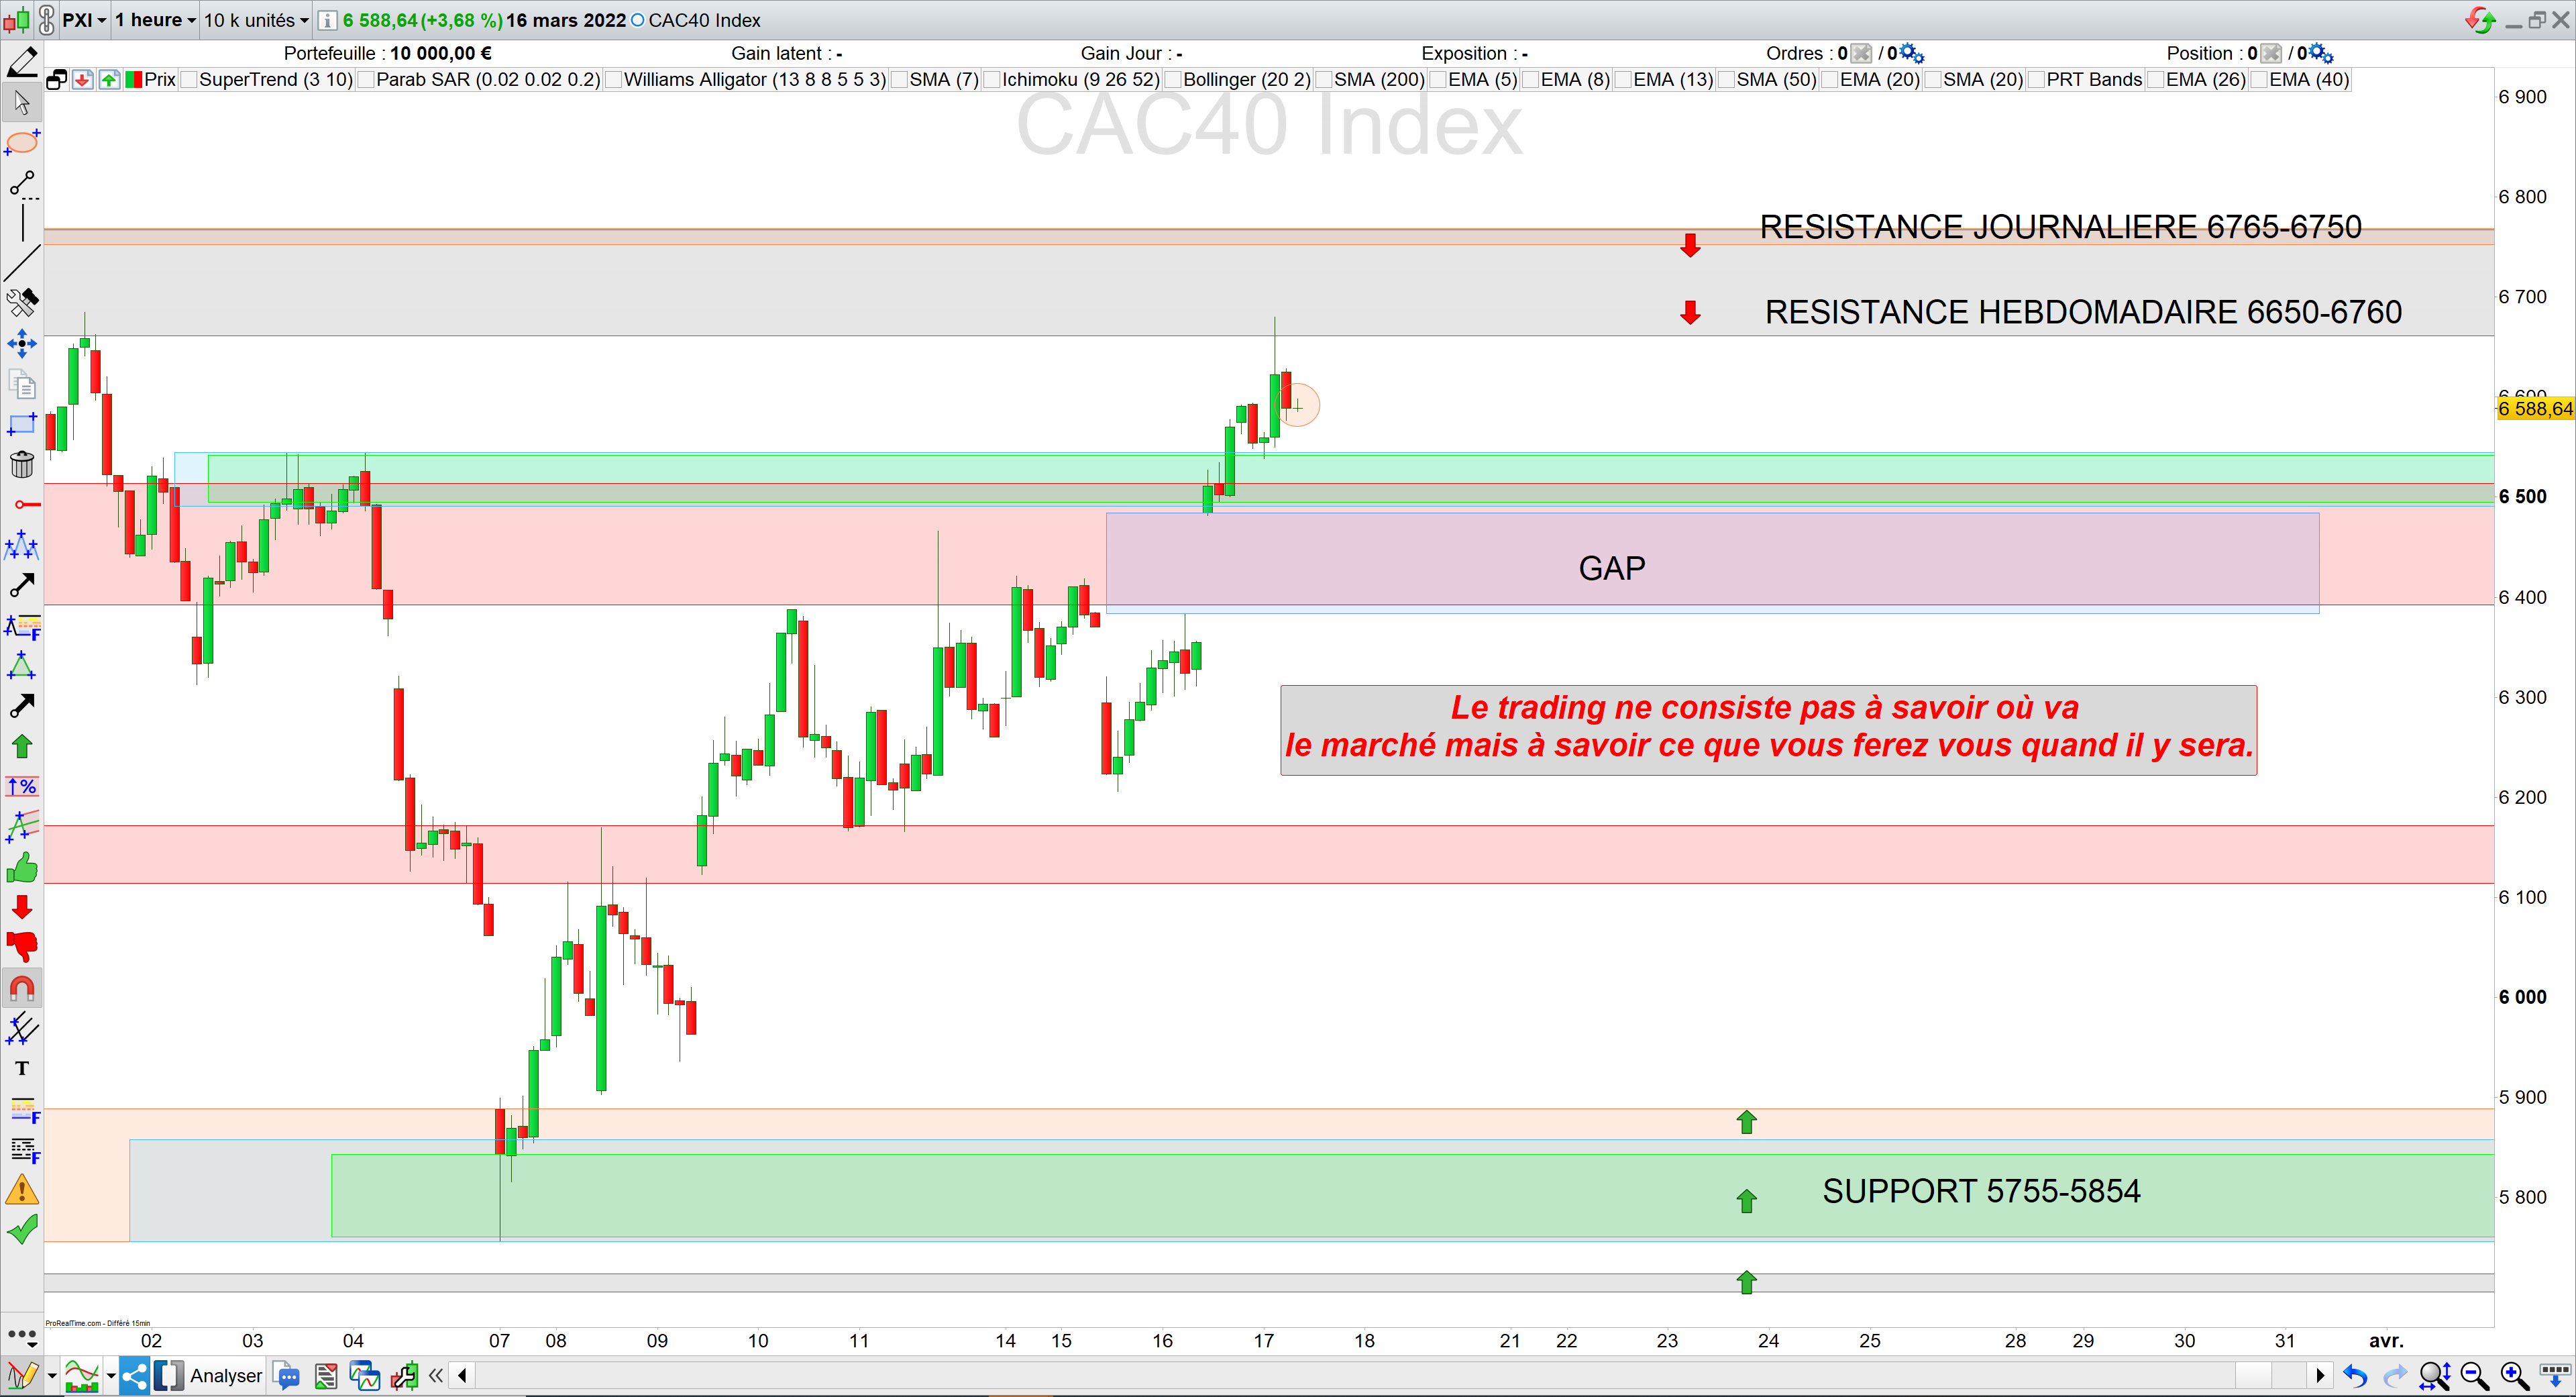 Trading cac40 17/03/22